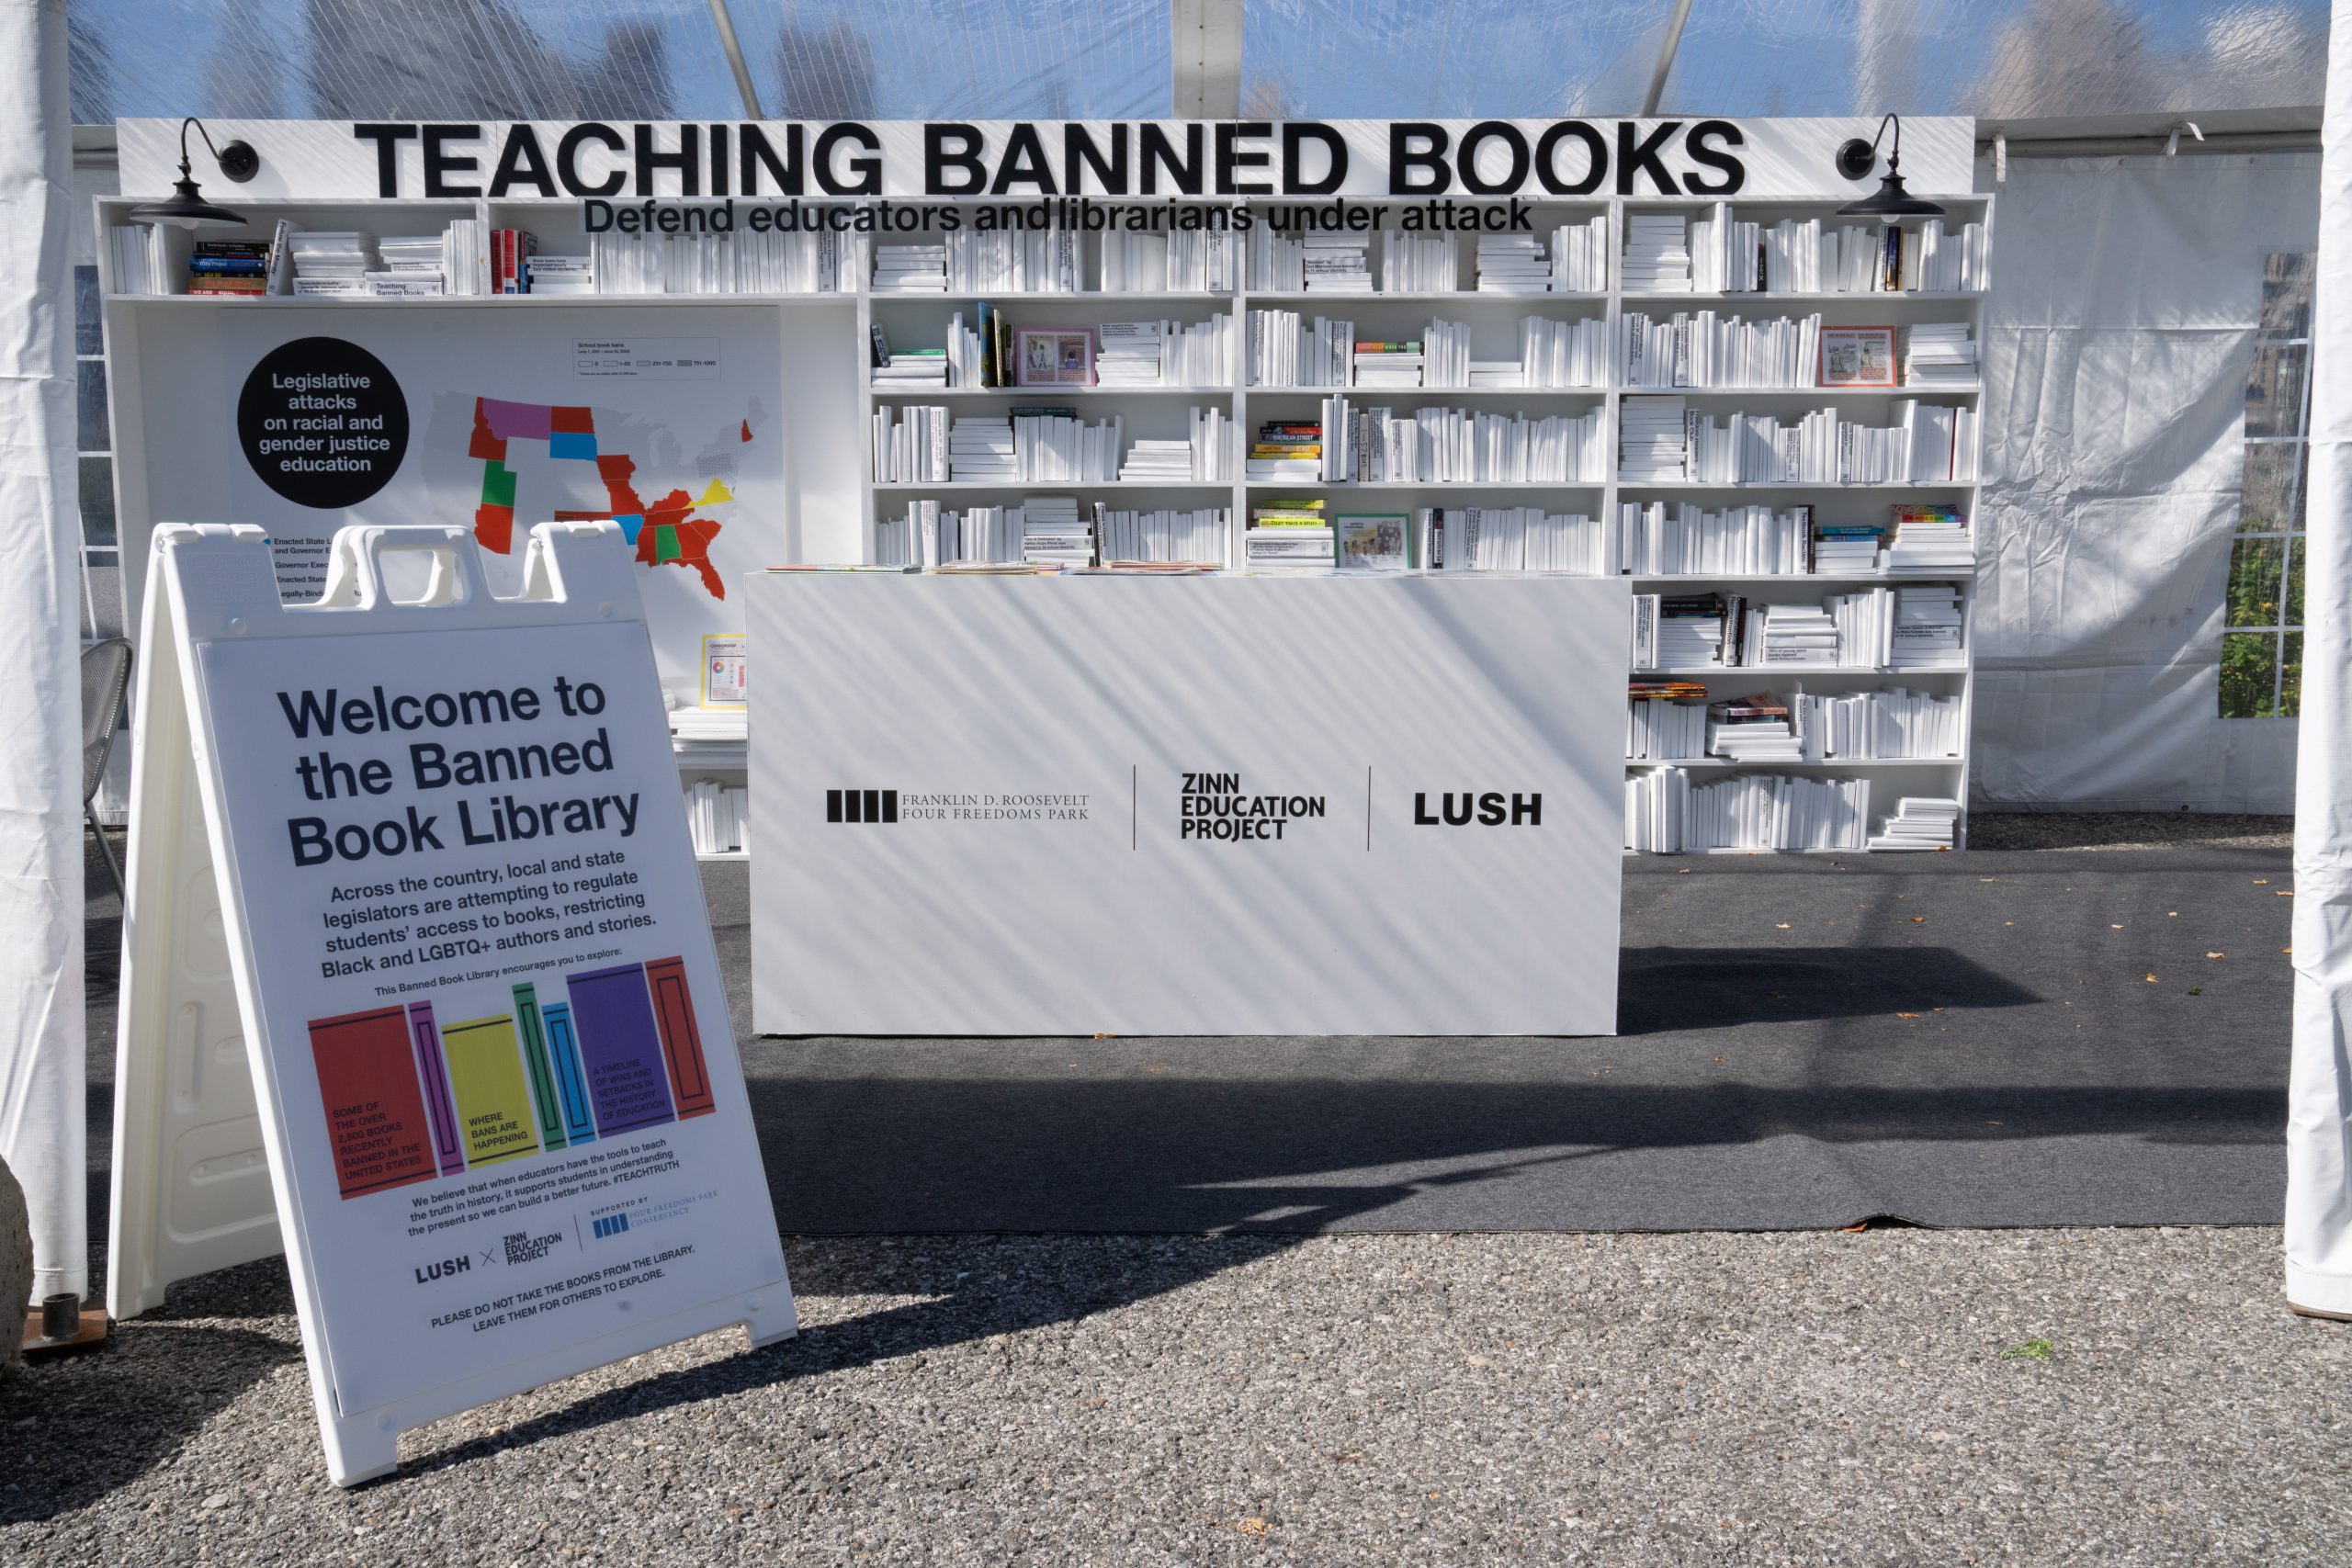 Thumbnail for Banned Book Library Post